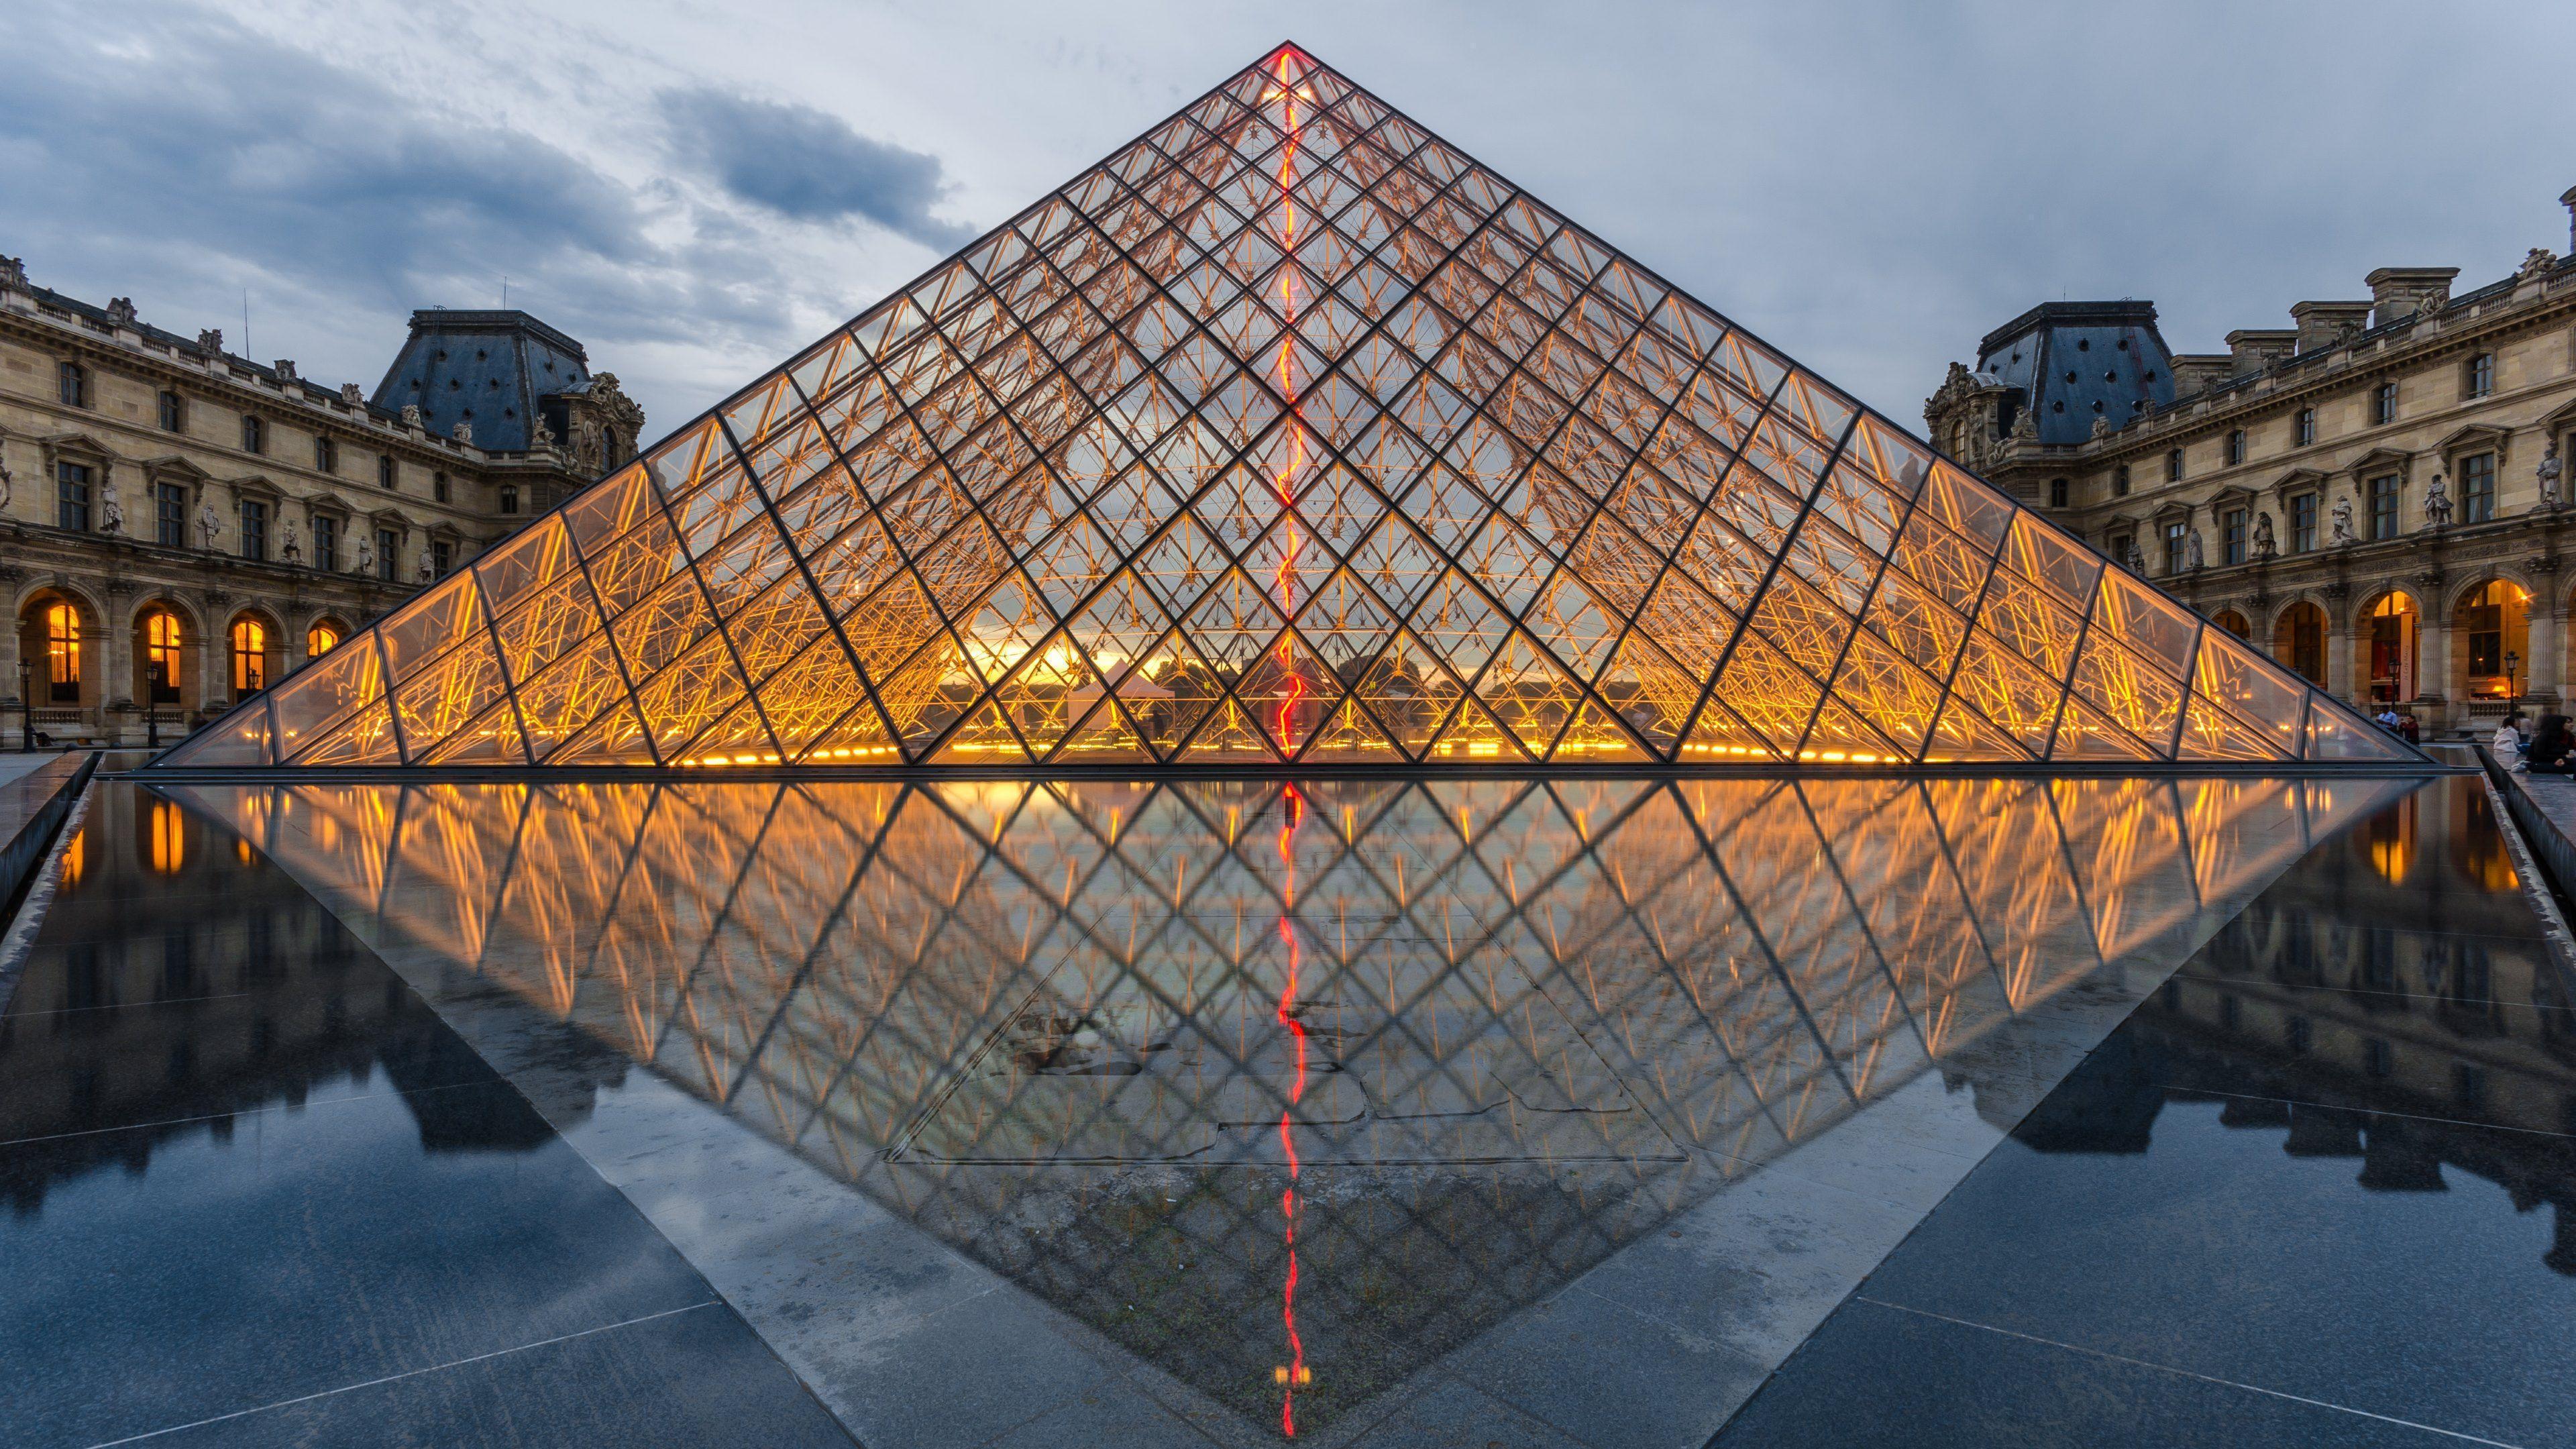 Louvre Pyramid Wallpaper in HD, 4K and wide sizes